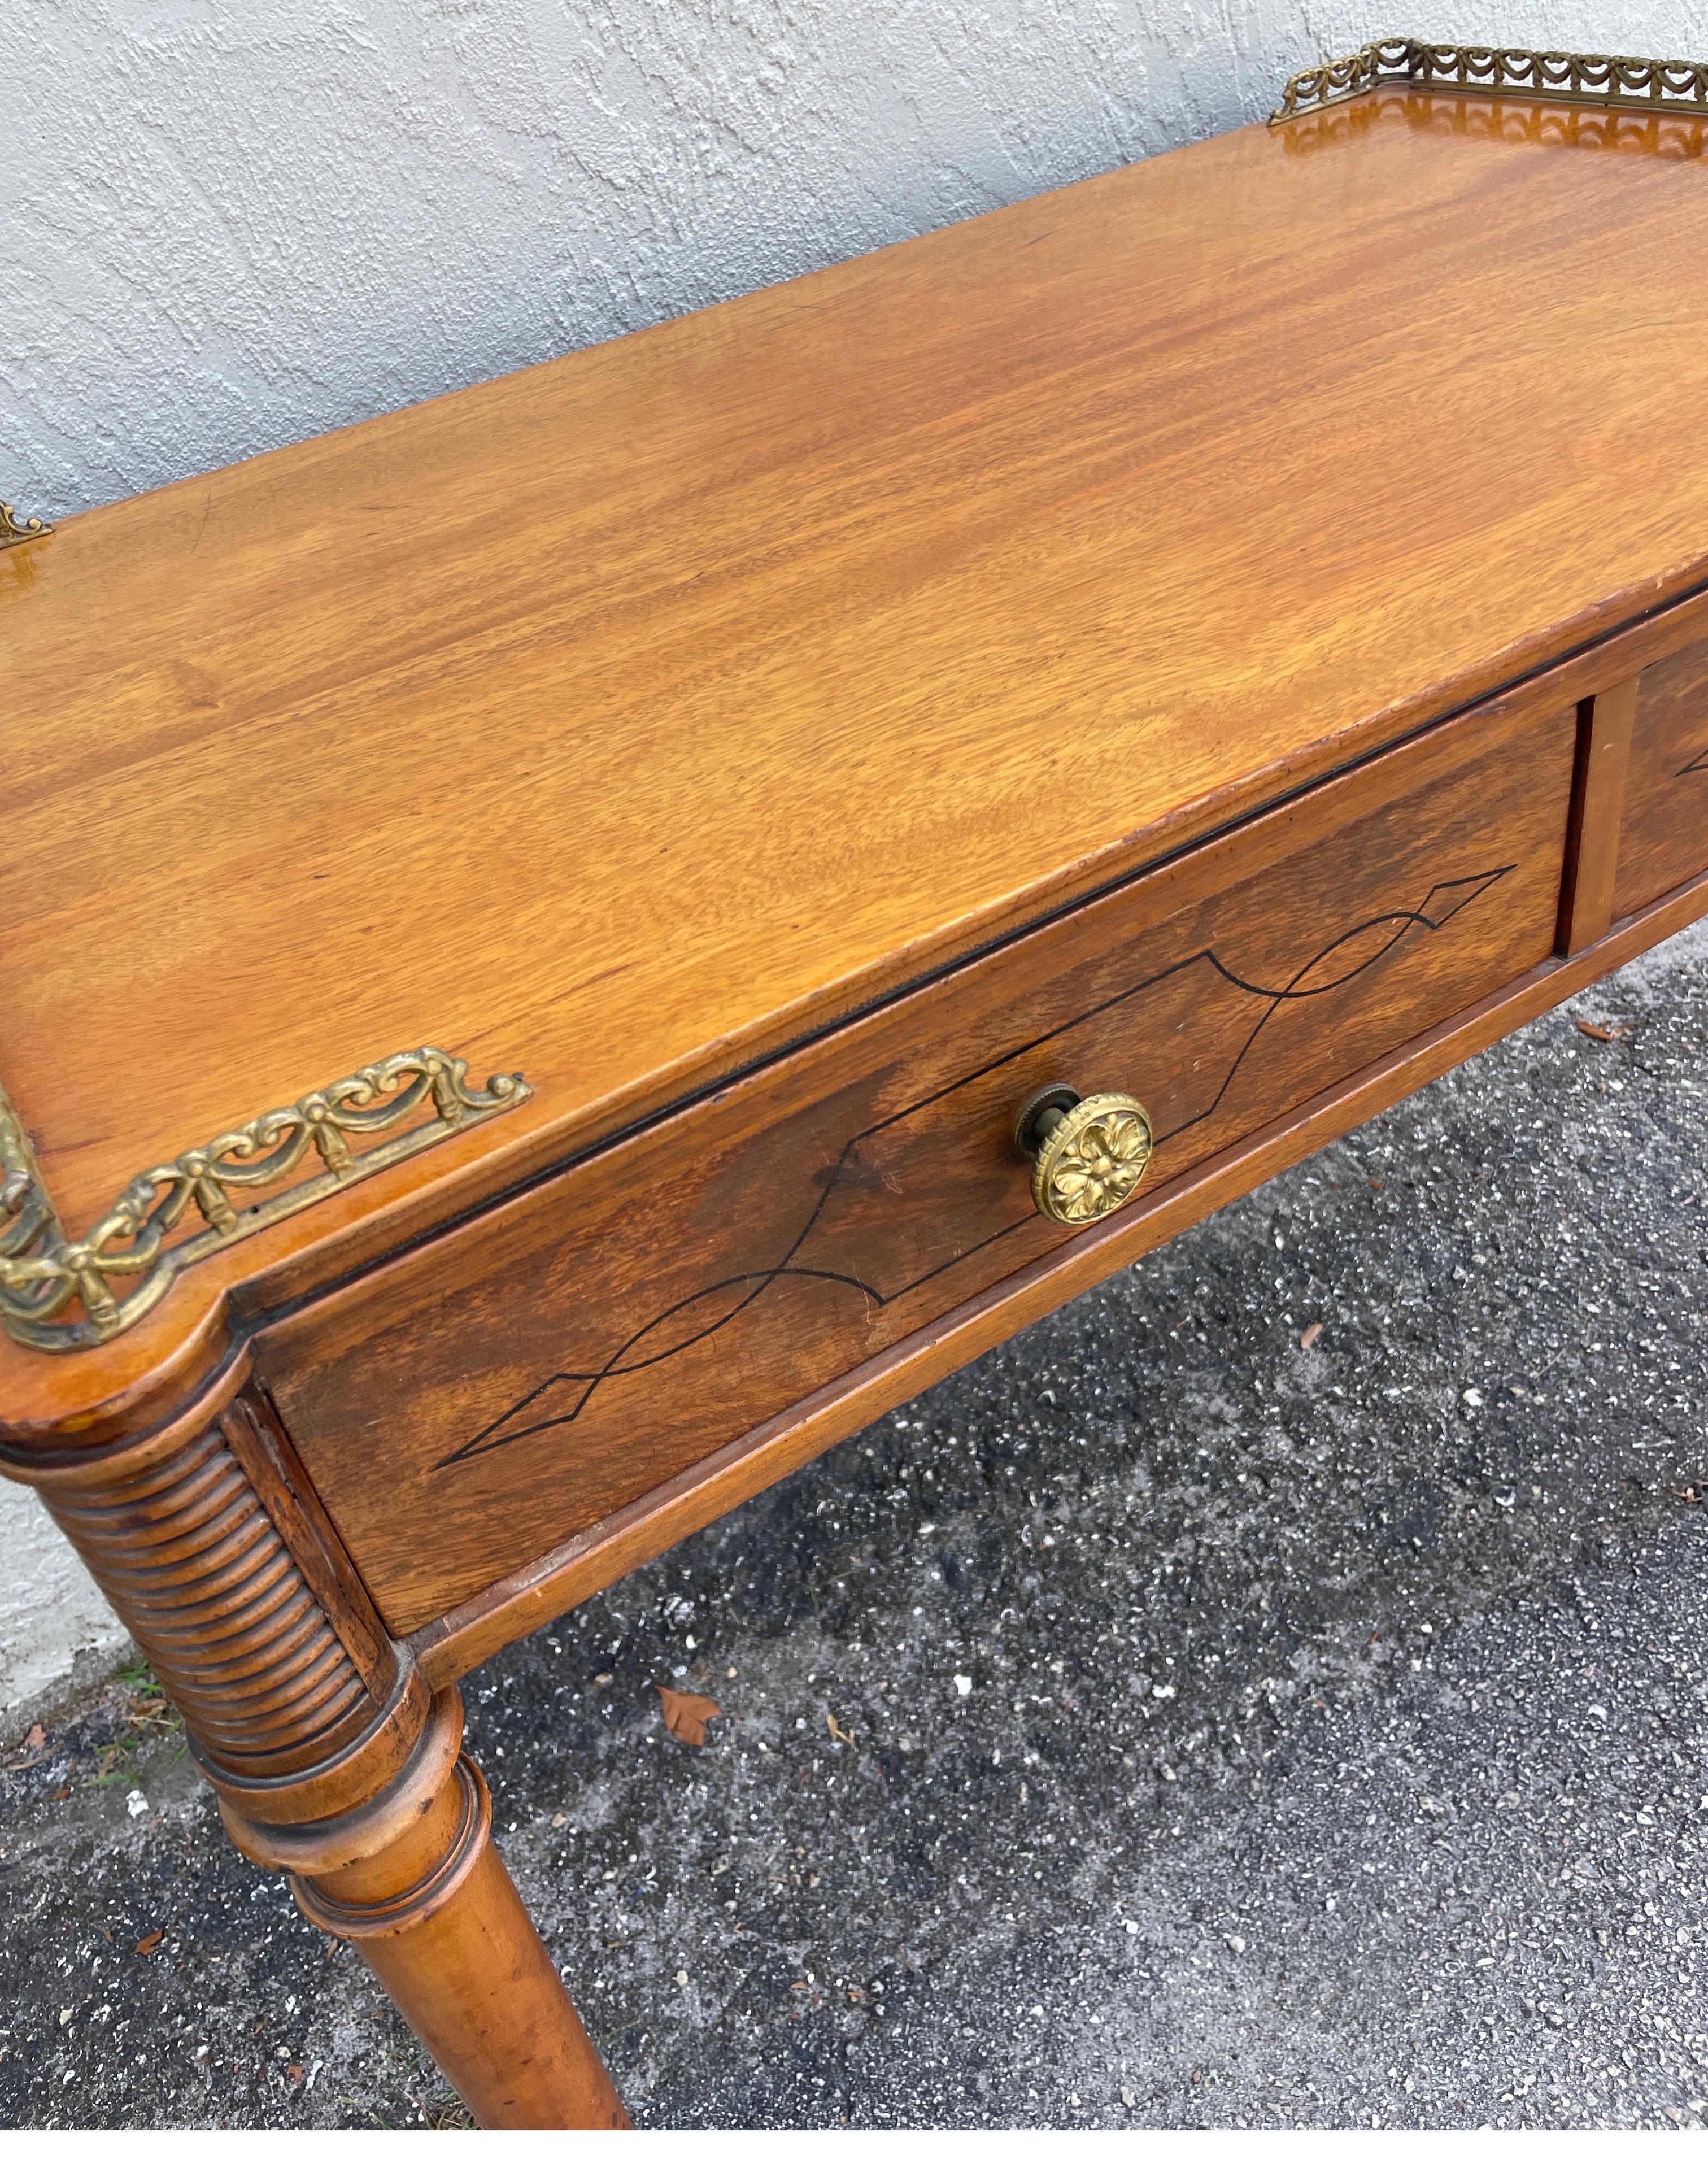 20th Century Vintage Regency Style Galleried Partners Desk / Server with Turret Corners For Sale